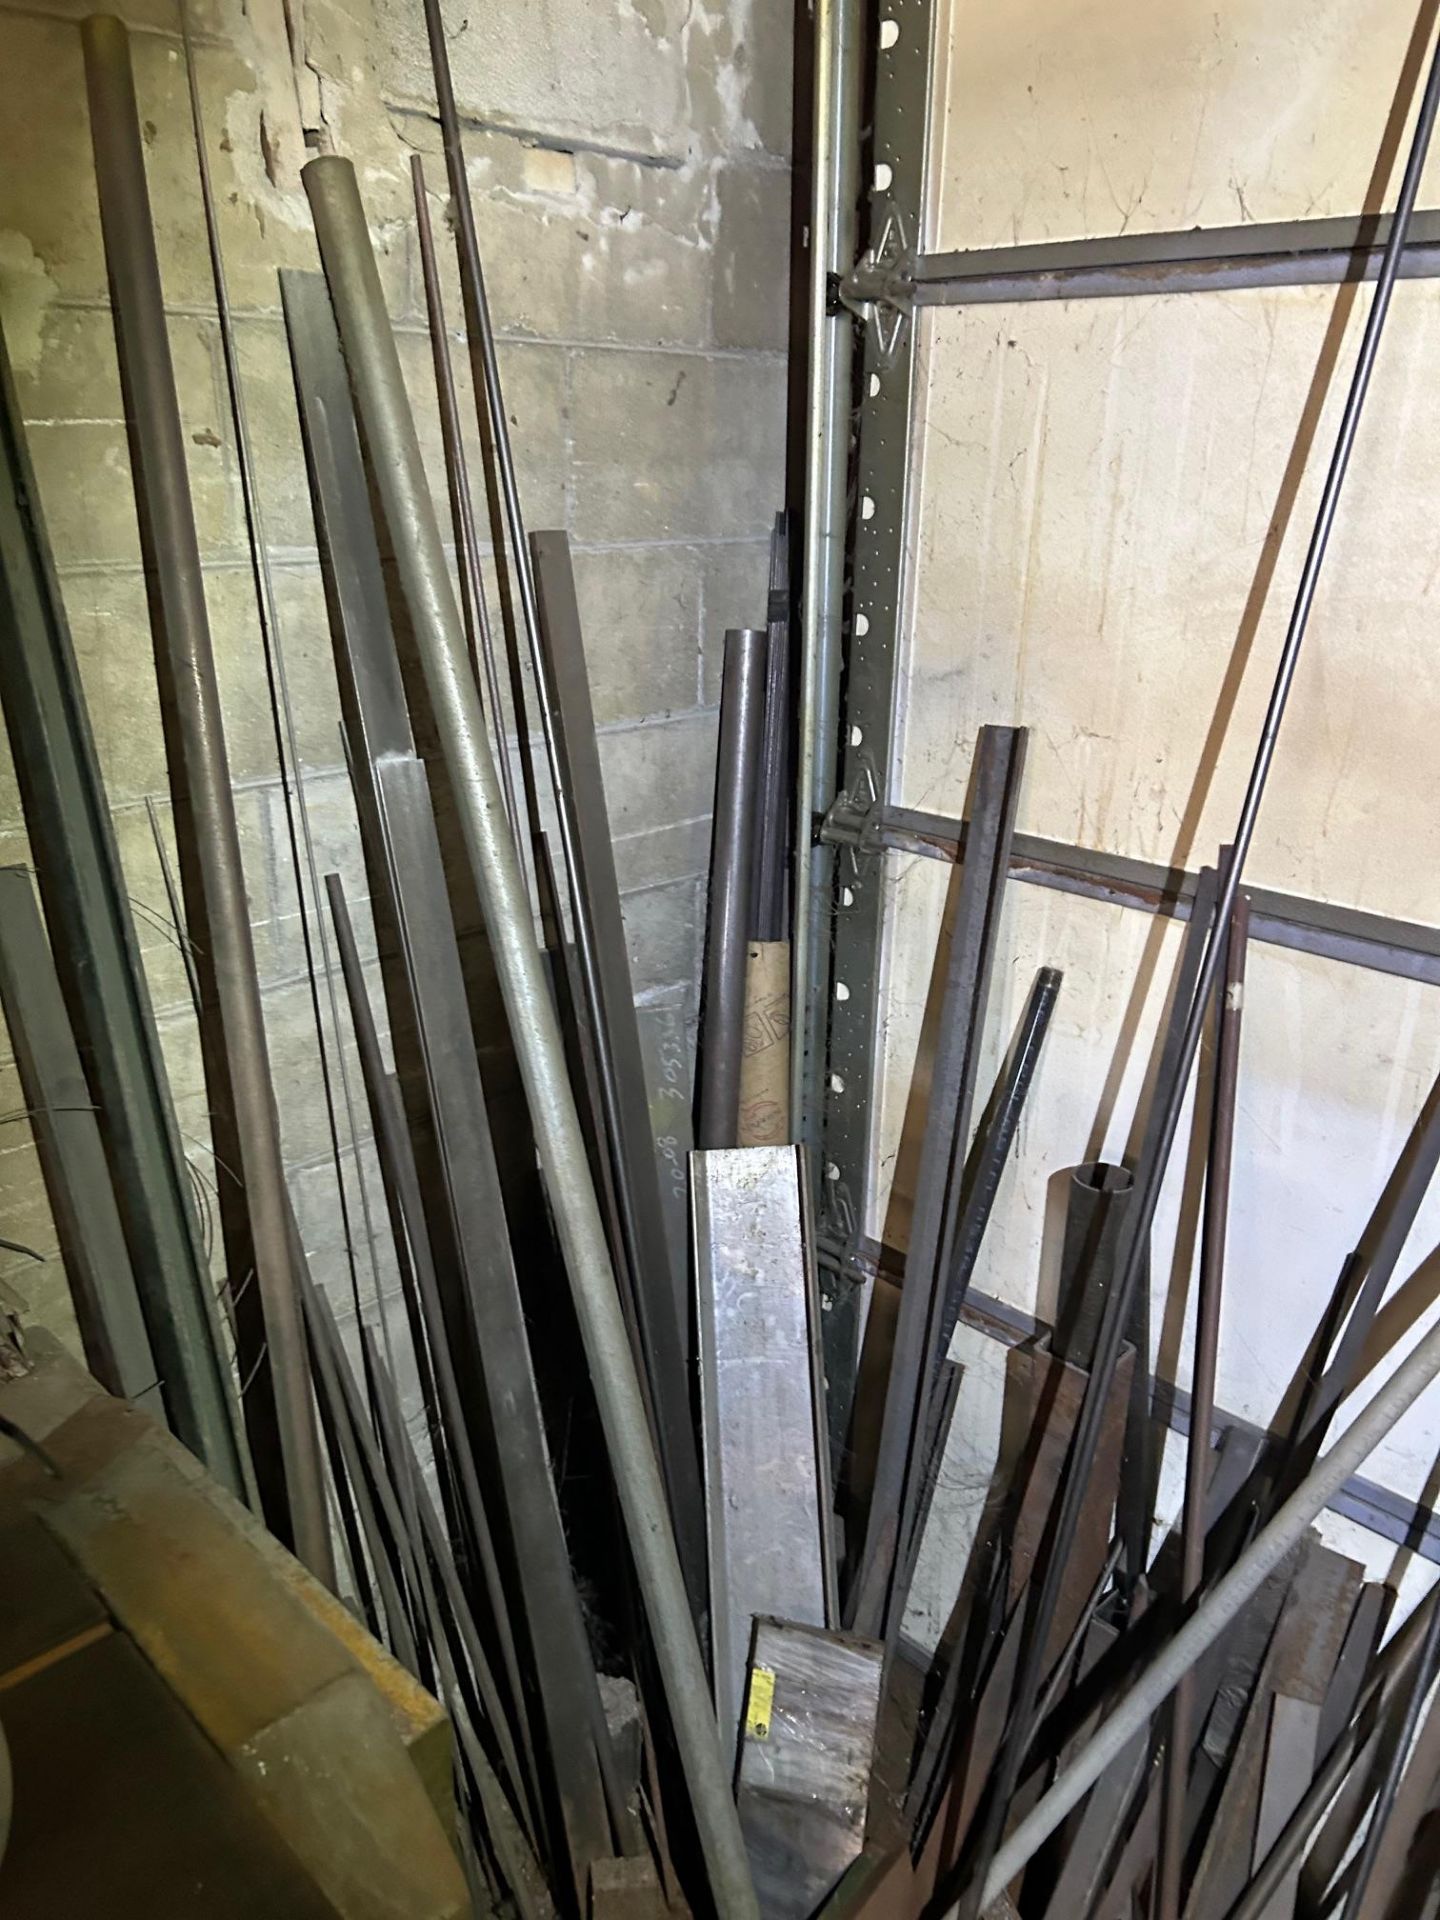 Raw Steel Contents, Bar Stock, Pipe, Expanded Metal & other Metal Stock with Metal Table - Image 2 of 9